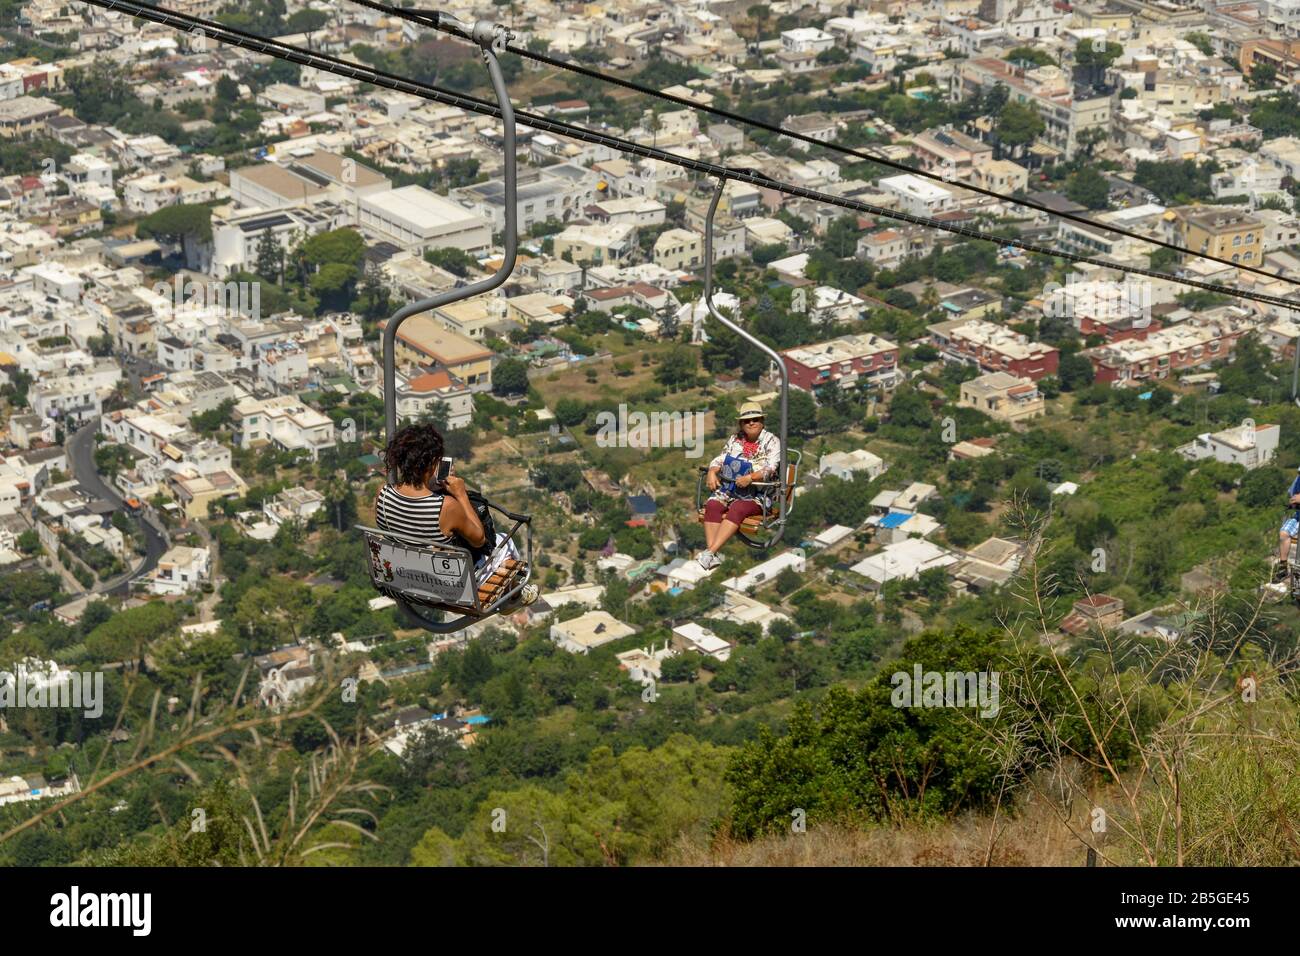 ANACAPRI, ISLE OF CAPRI, ITALY - AUGUST 2019: People on a chair lift travelling up and down the mountain to the summit of Mount Solaro above Anacapri Stock Photo